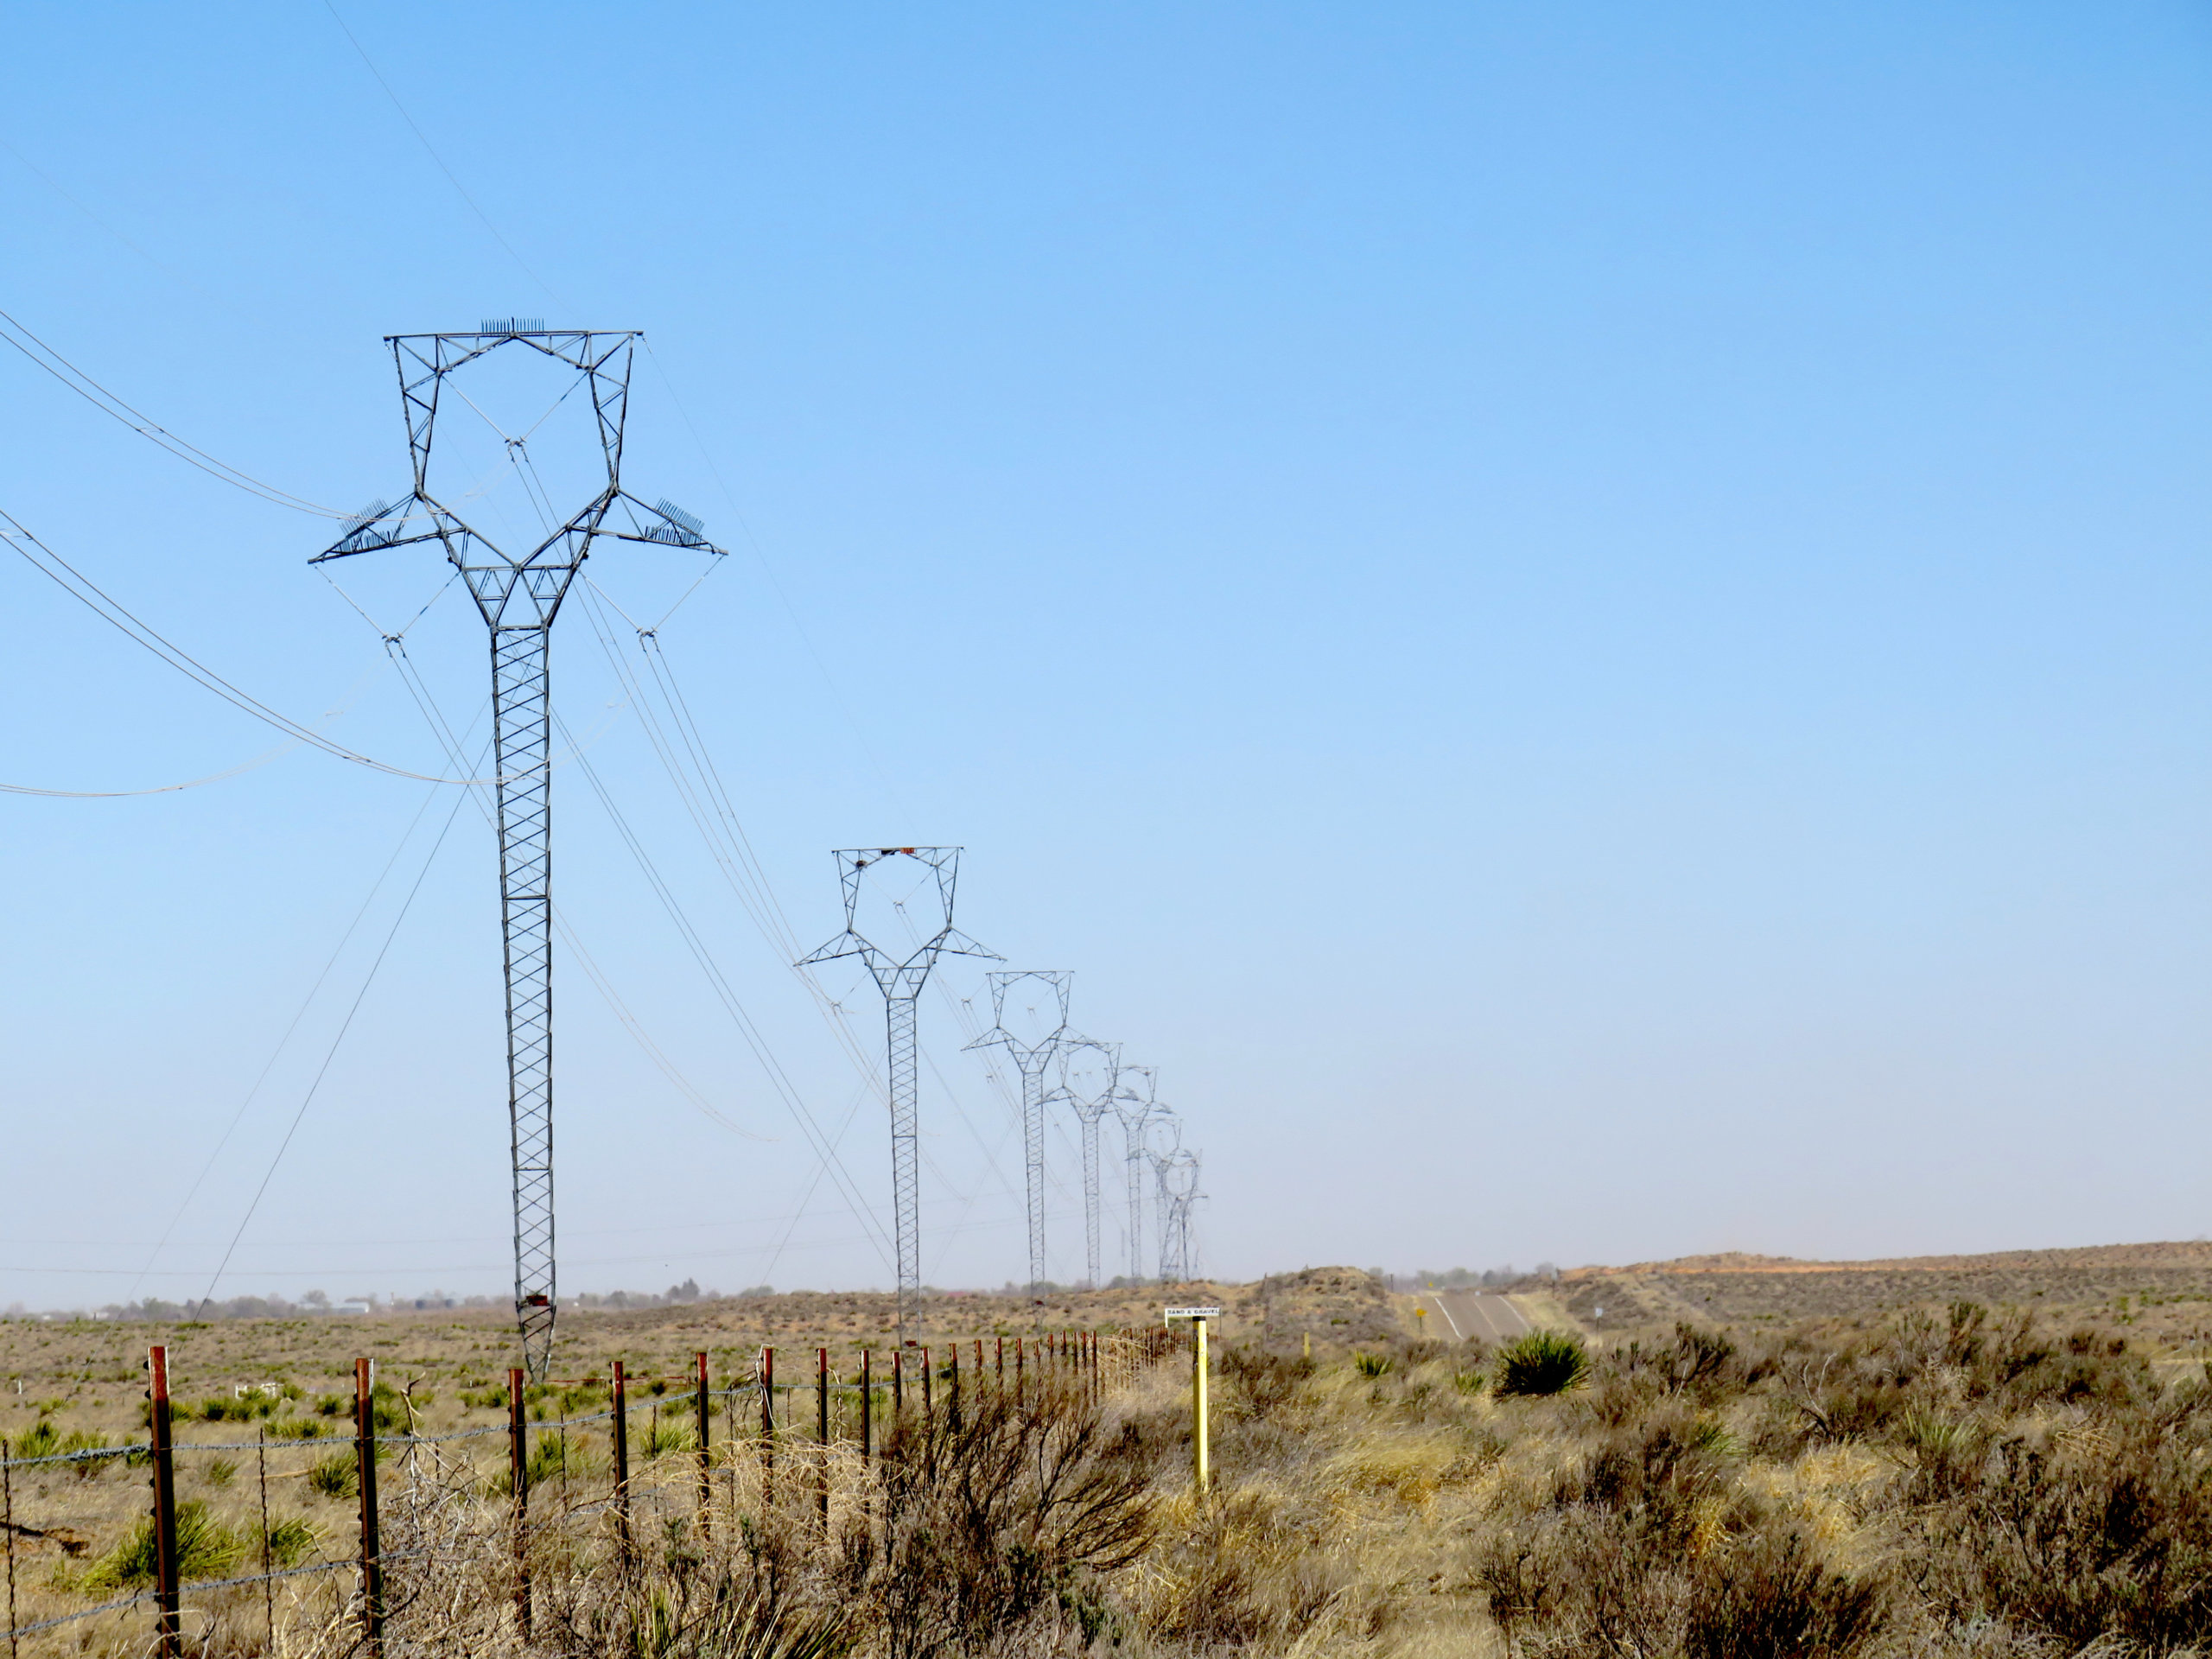 Invenergy official: Planned transmission line will bring economic benefits to New Mexico